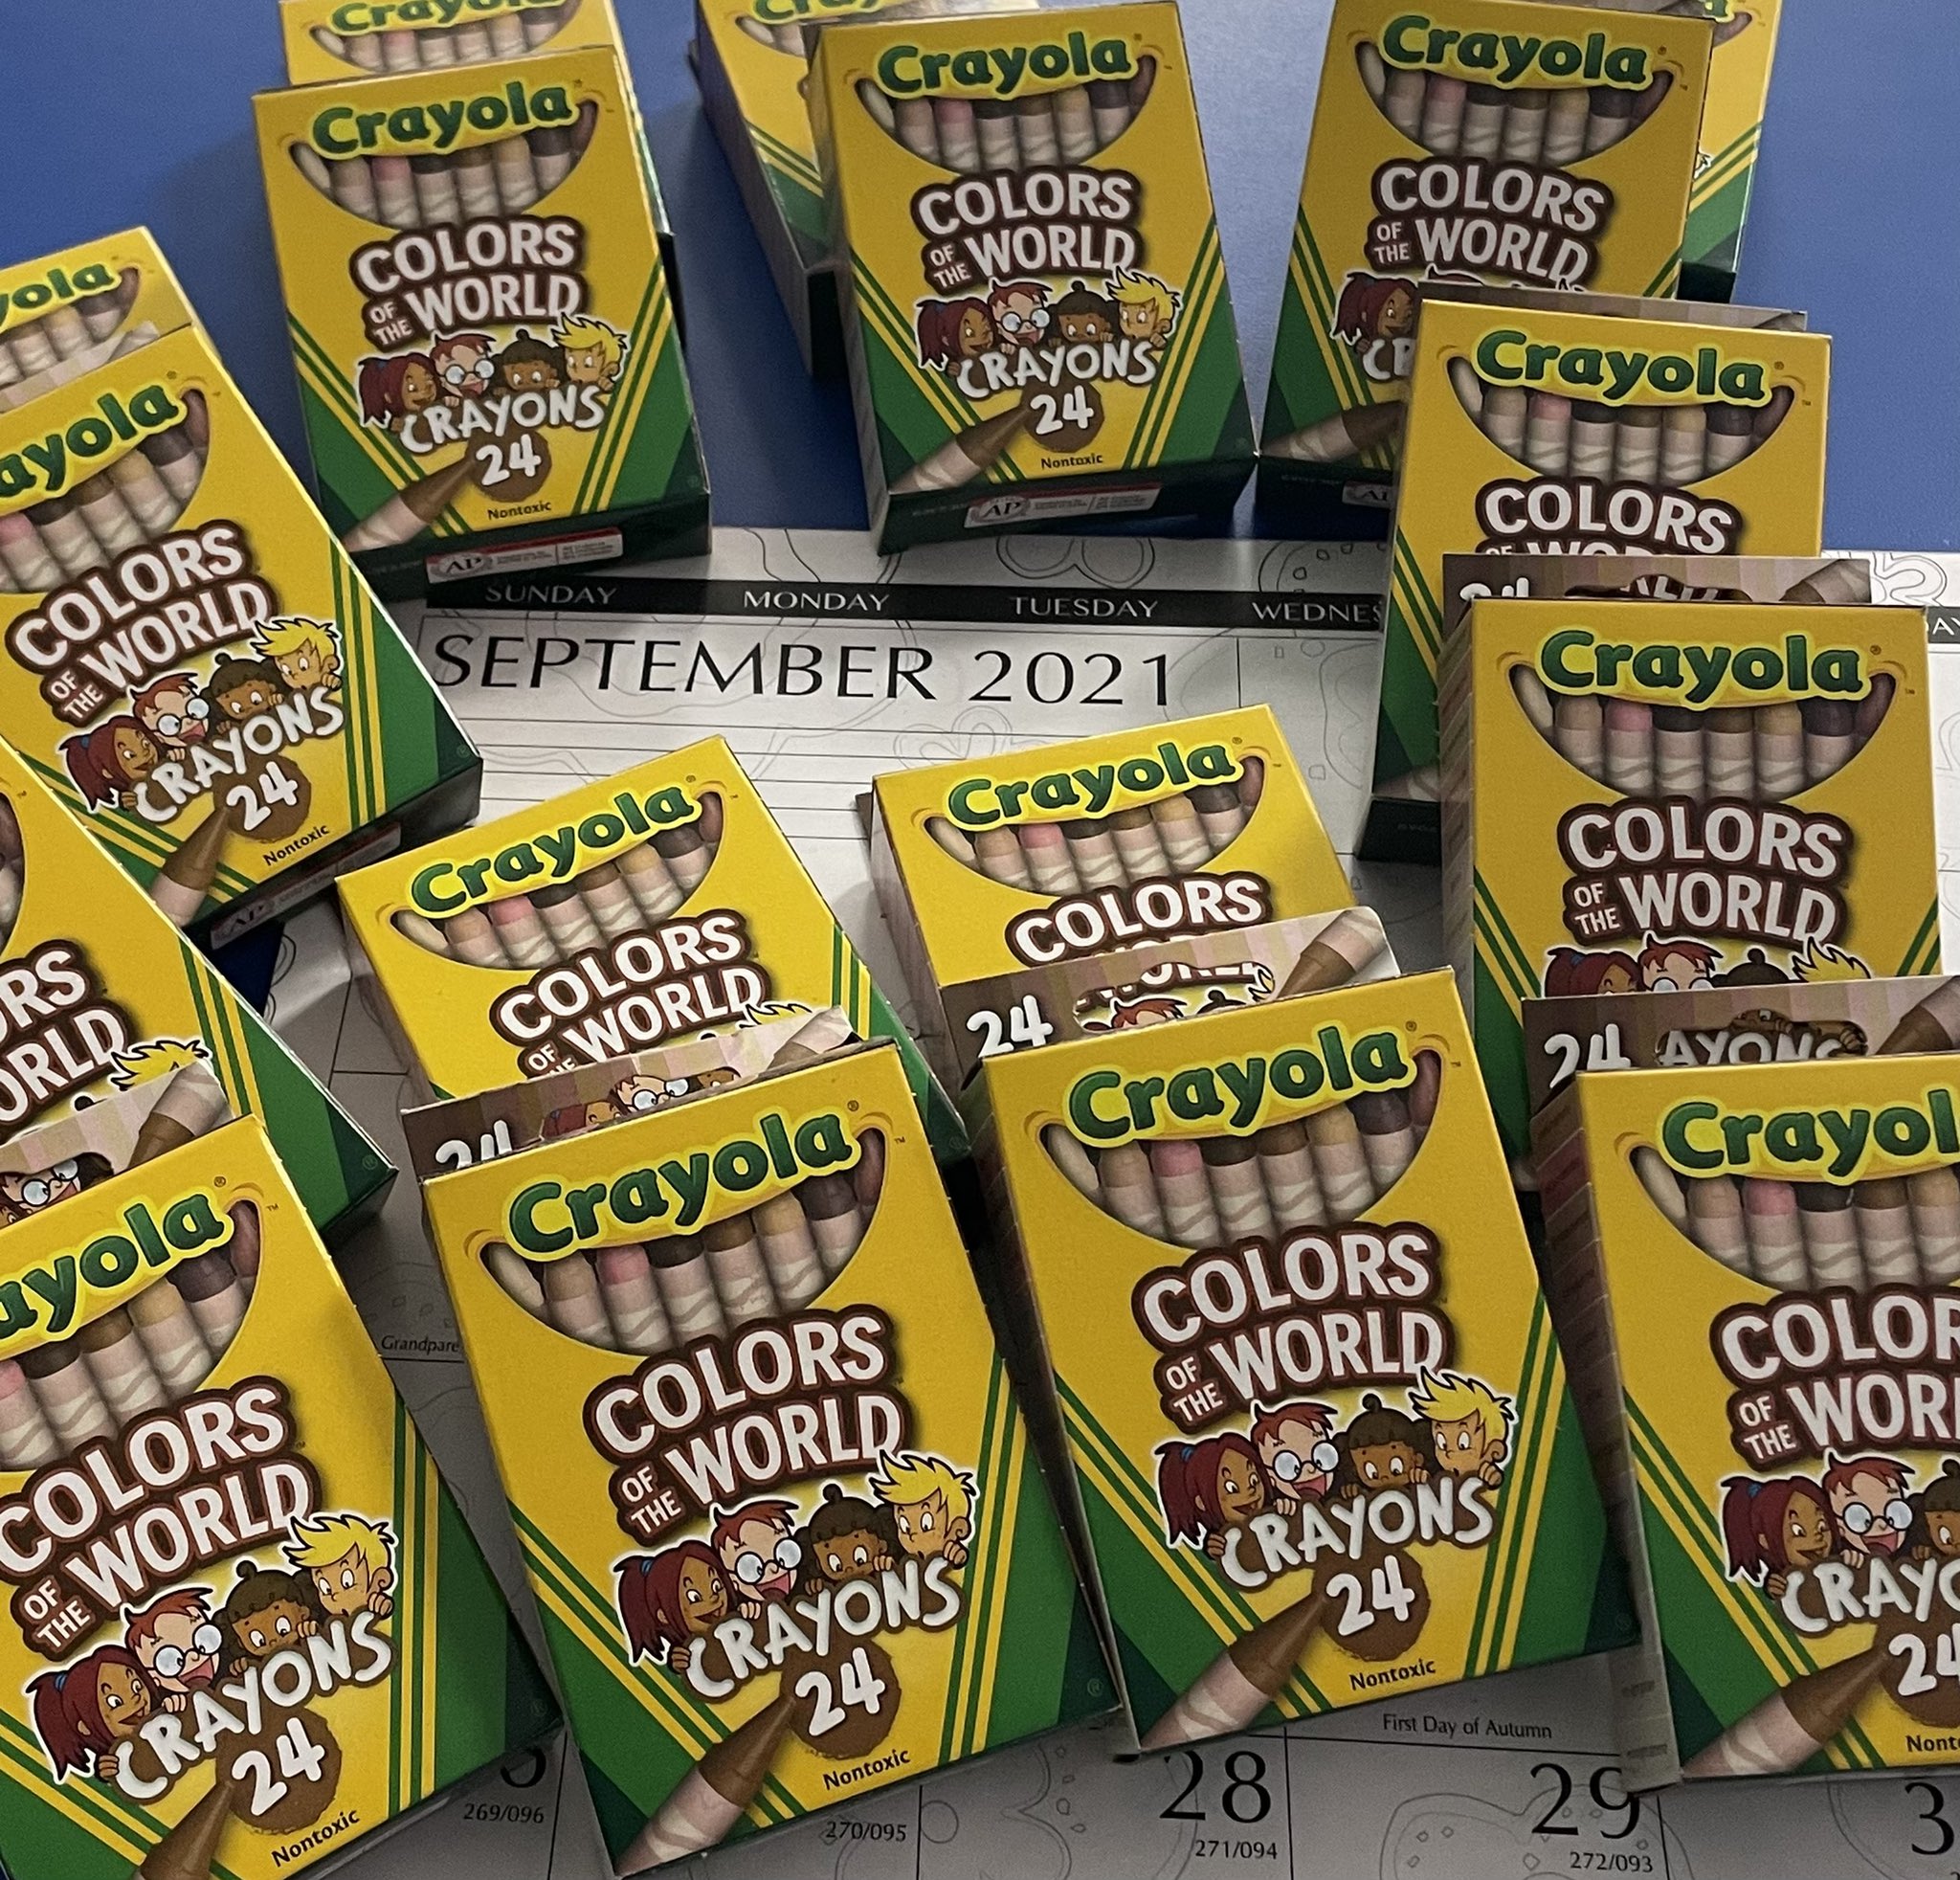 Replying to @💩 these are 100% worth it. Love them! #crayola